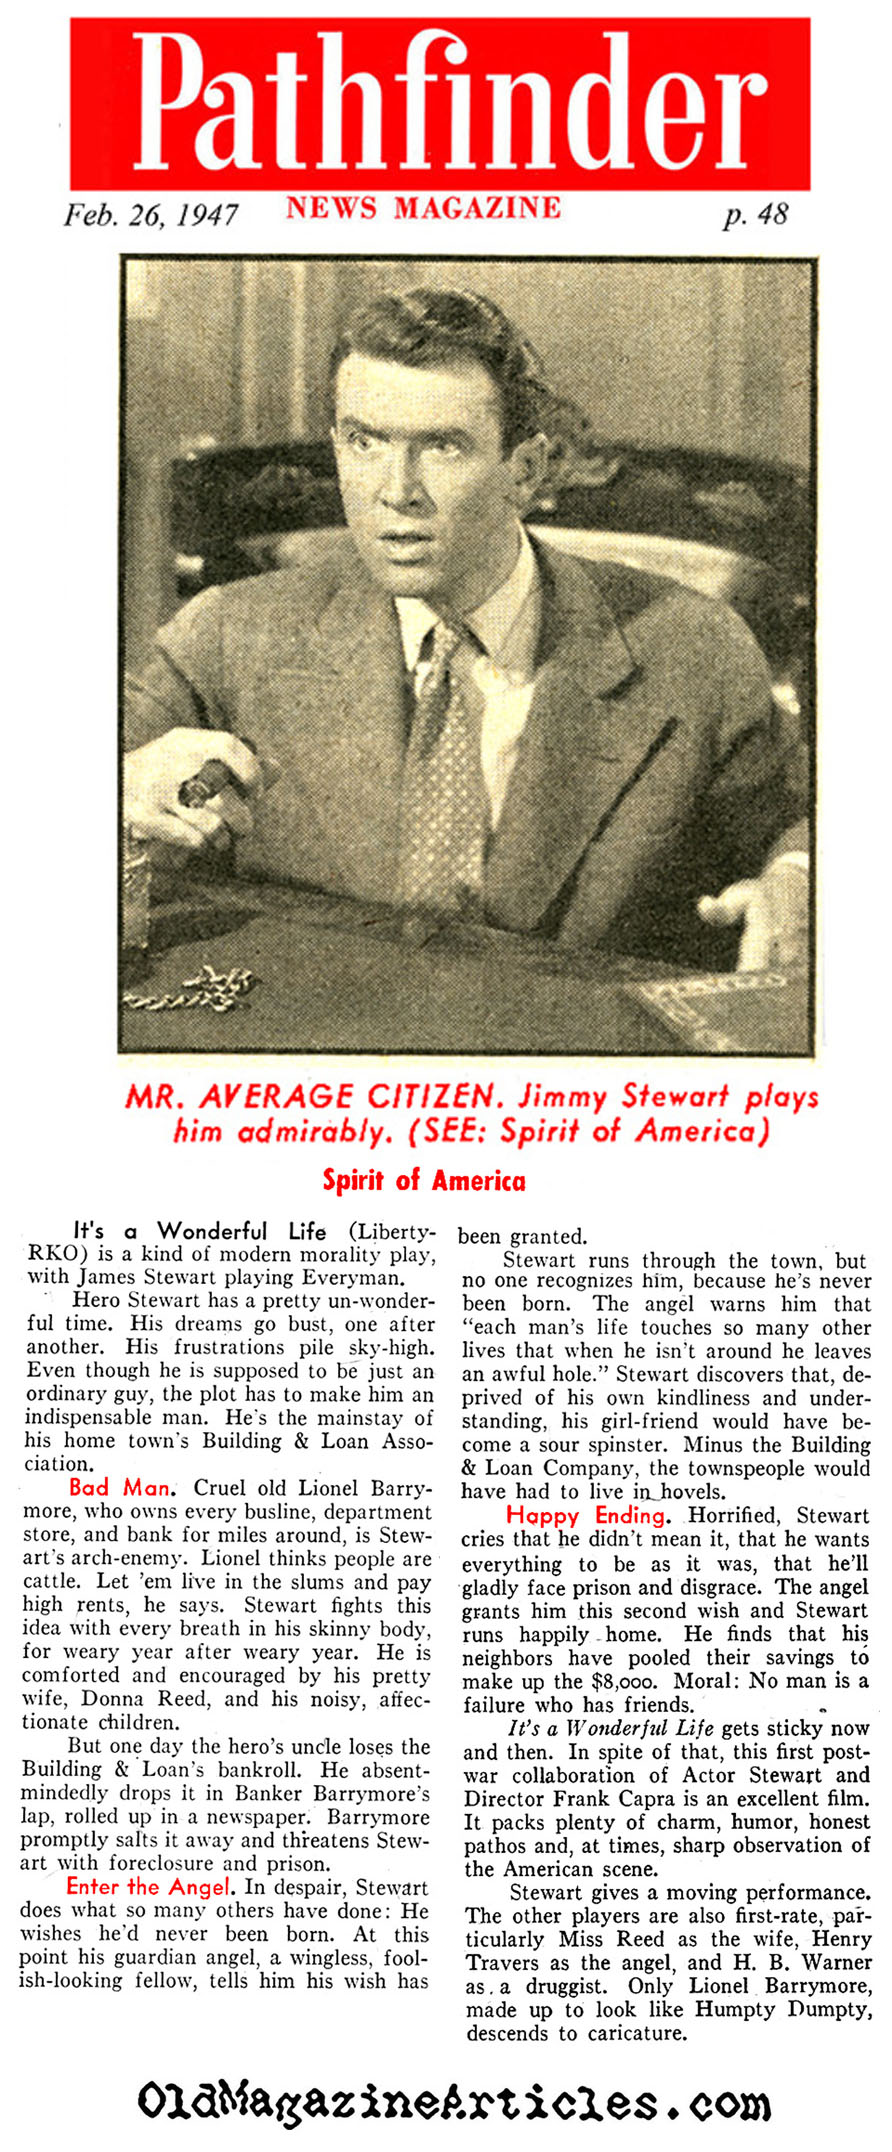 Another Review (Pathfinder Magazine, 1947)